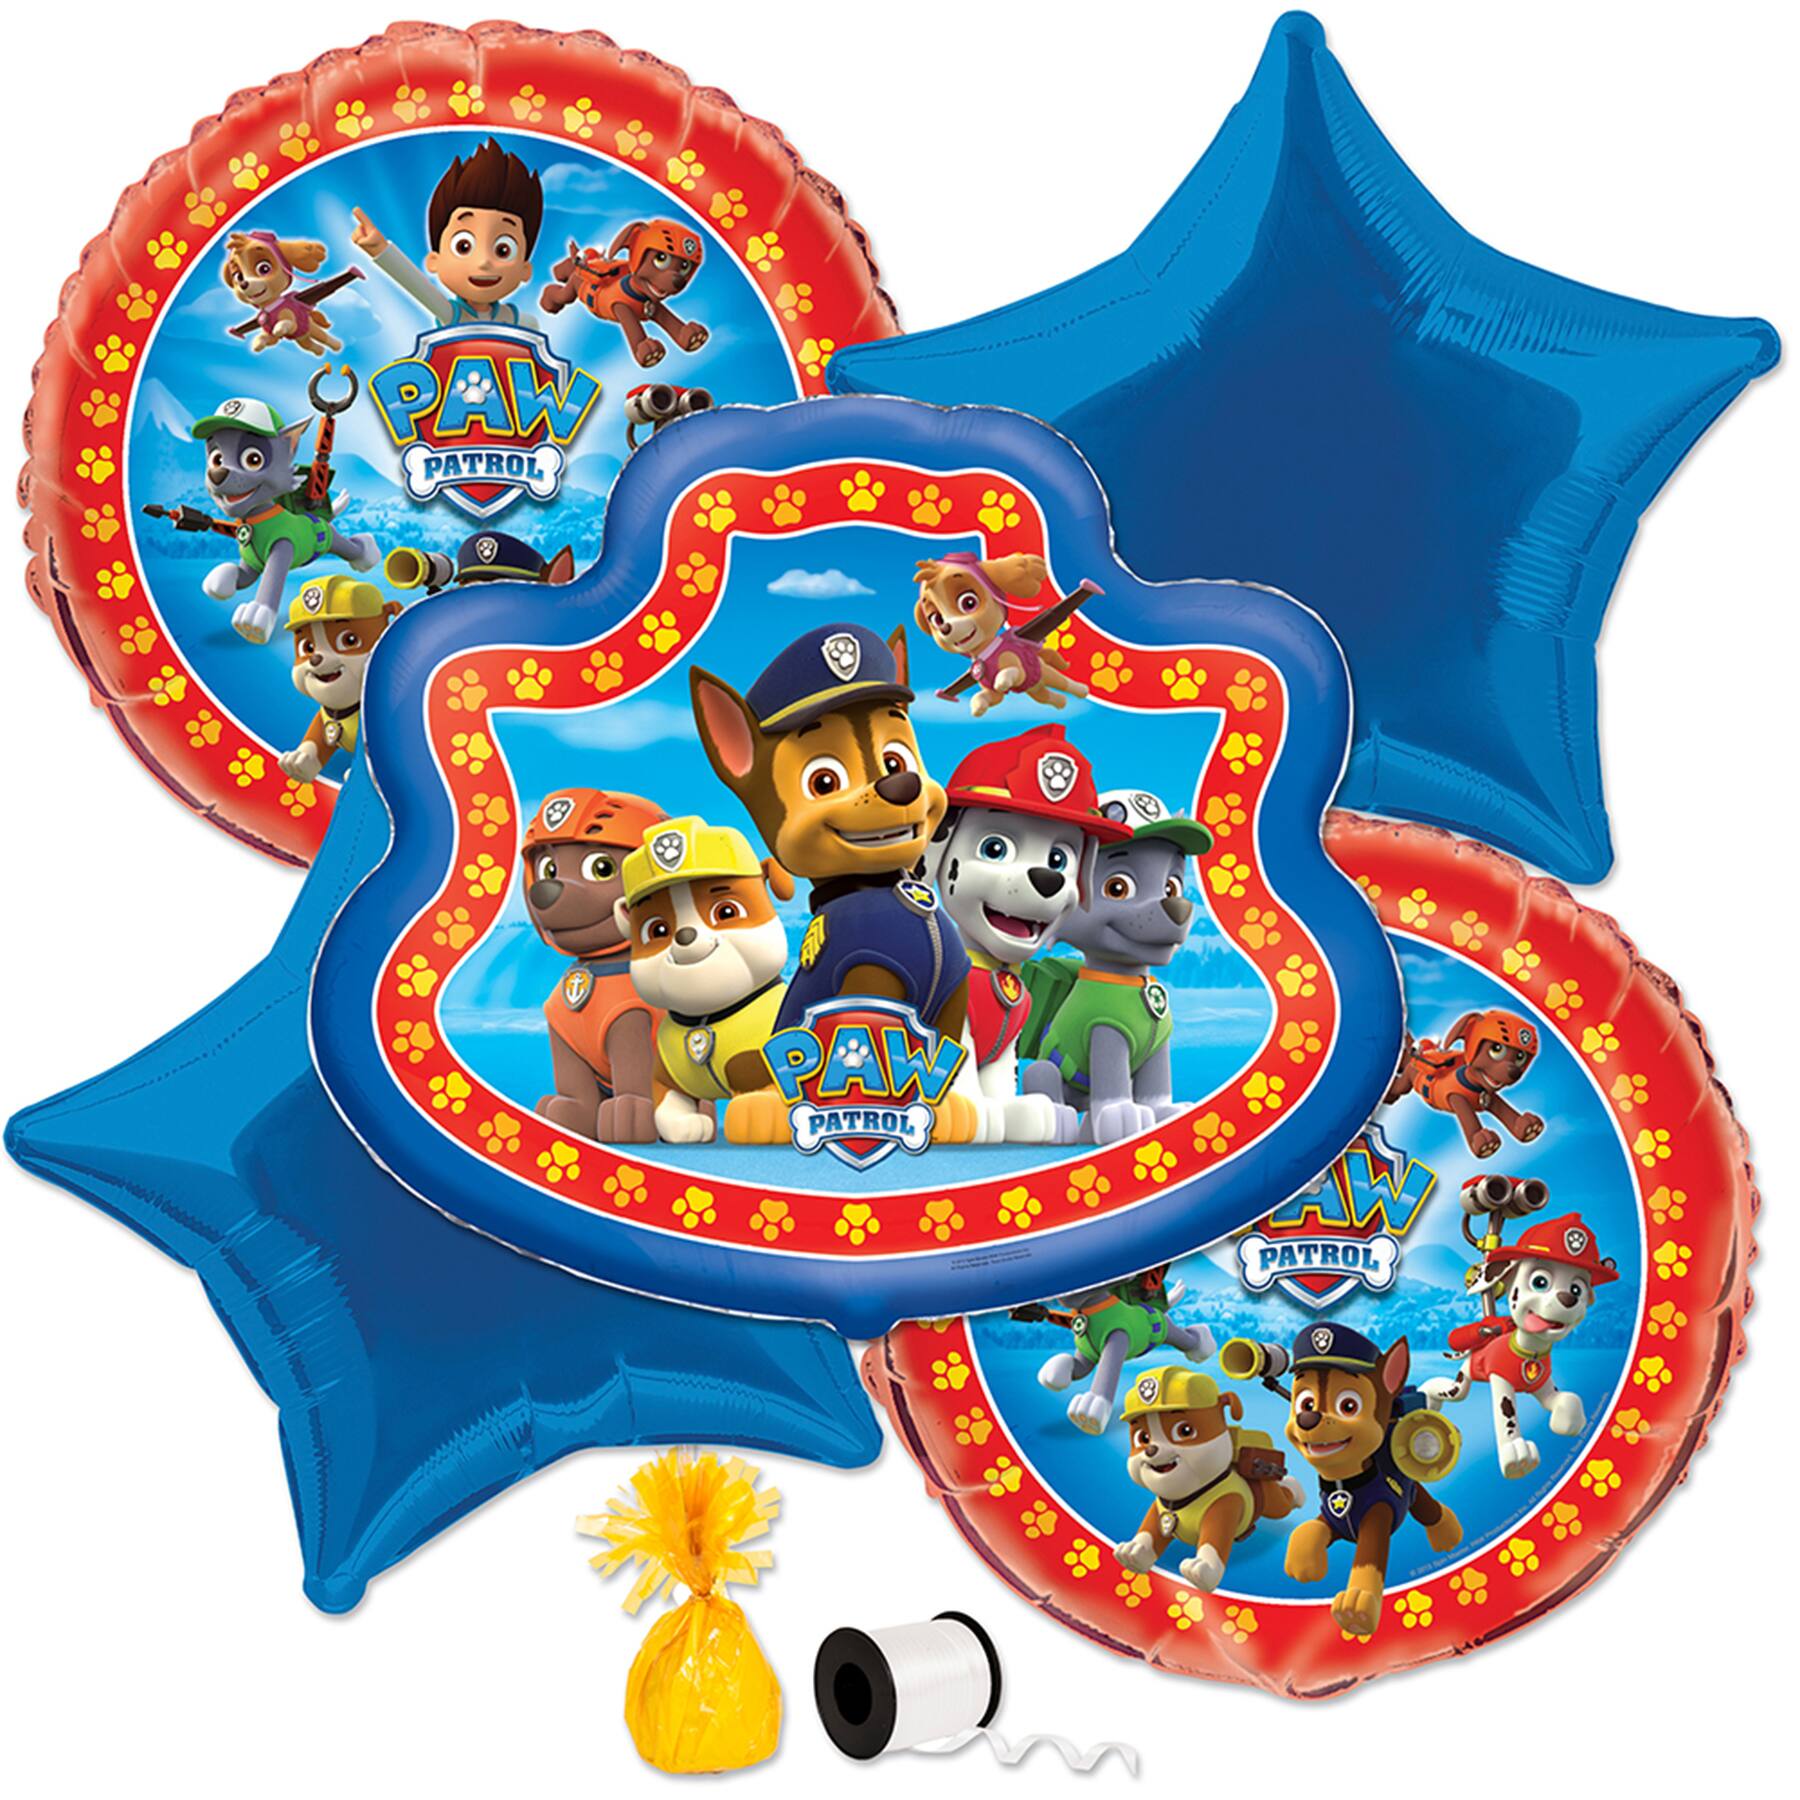 NEW PAW PATROL HELIUM BALLOON SET OF 5 PUPPY PARTY DECORATION USA SELLER 